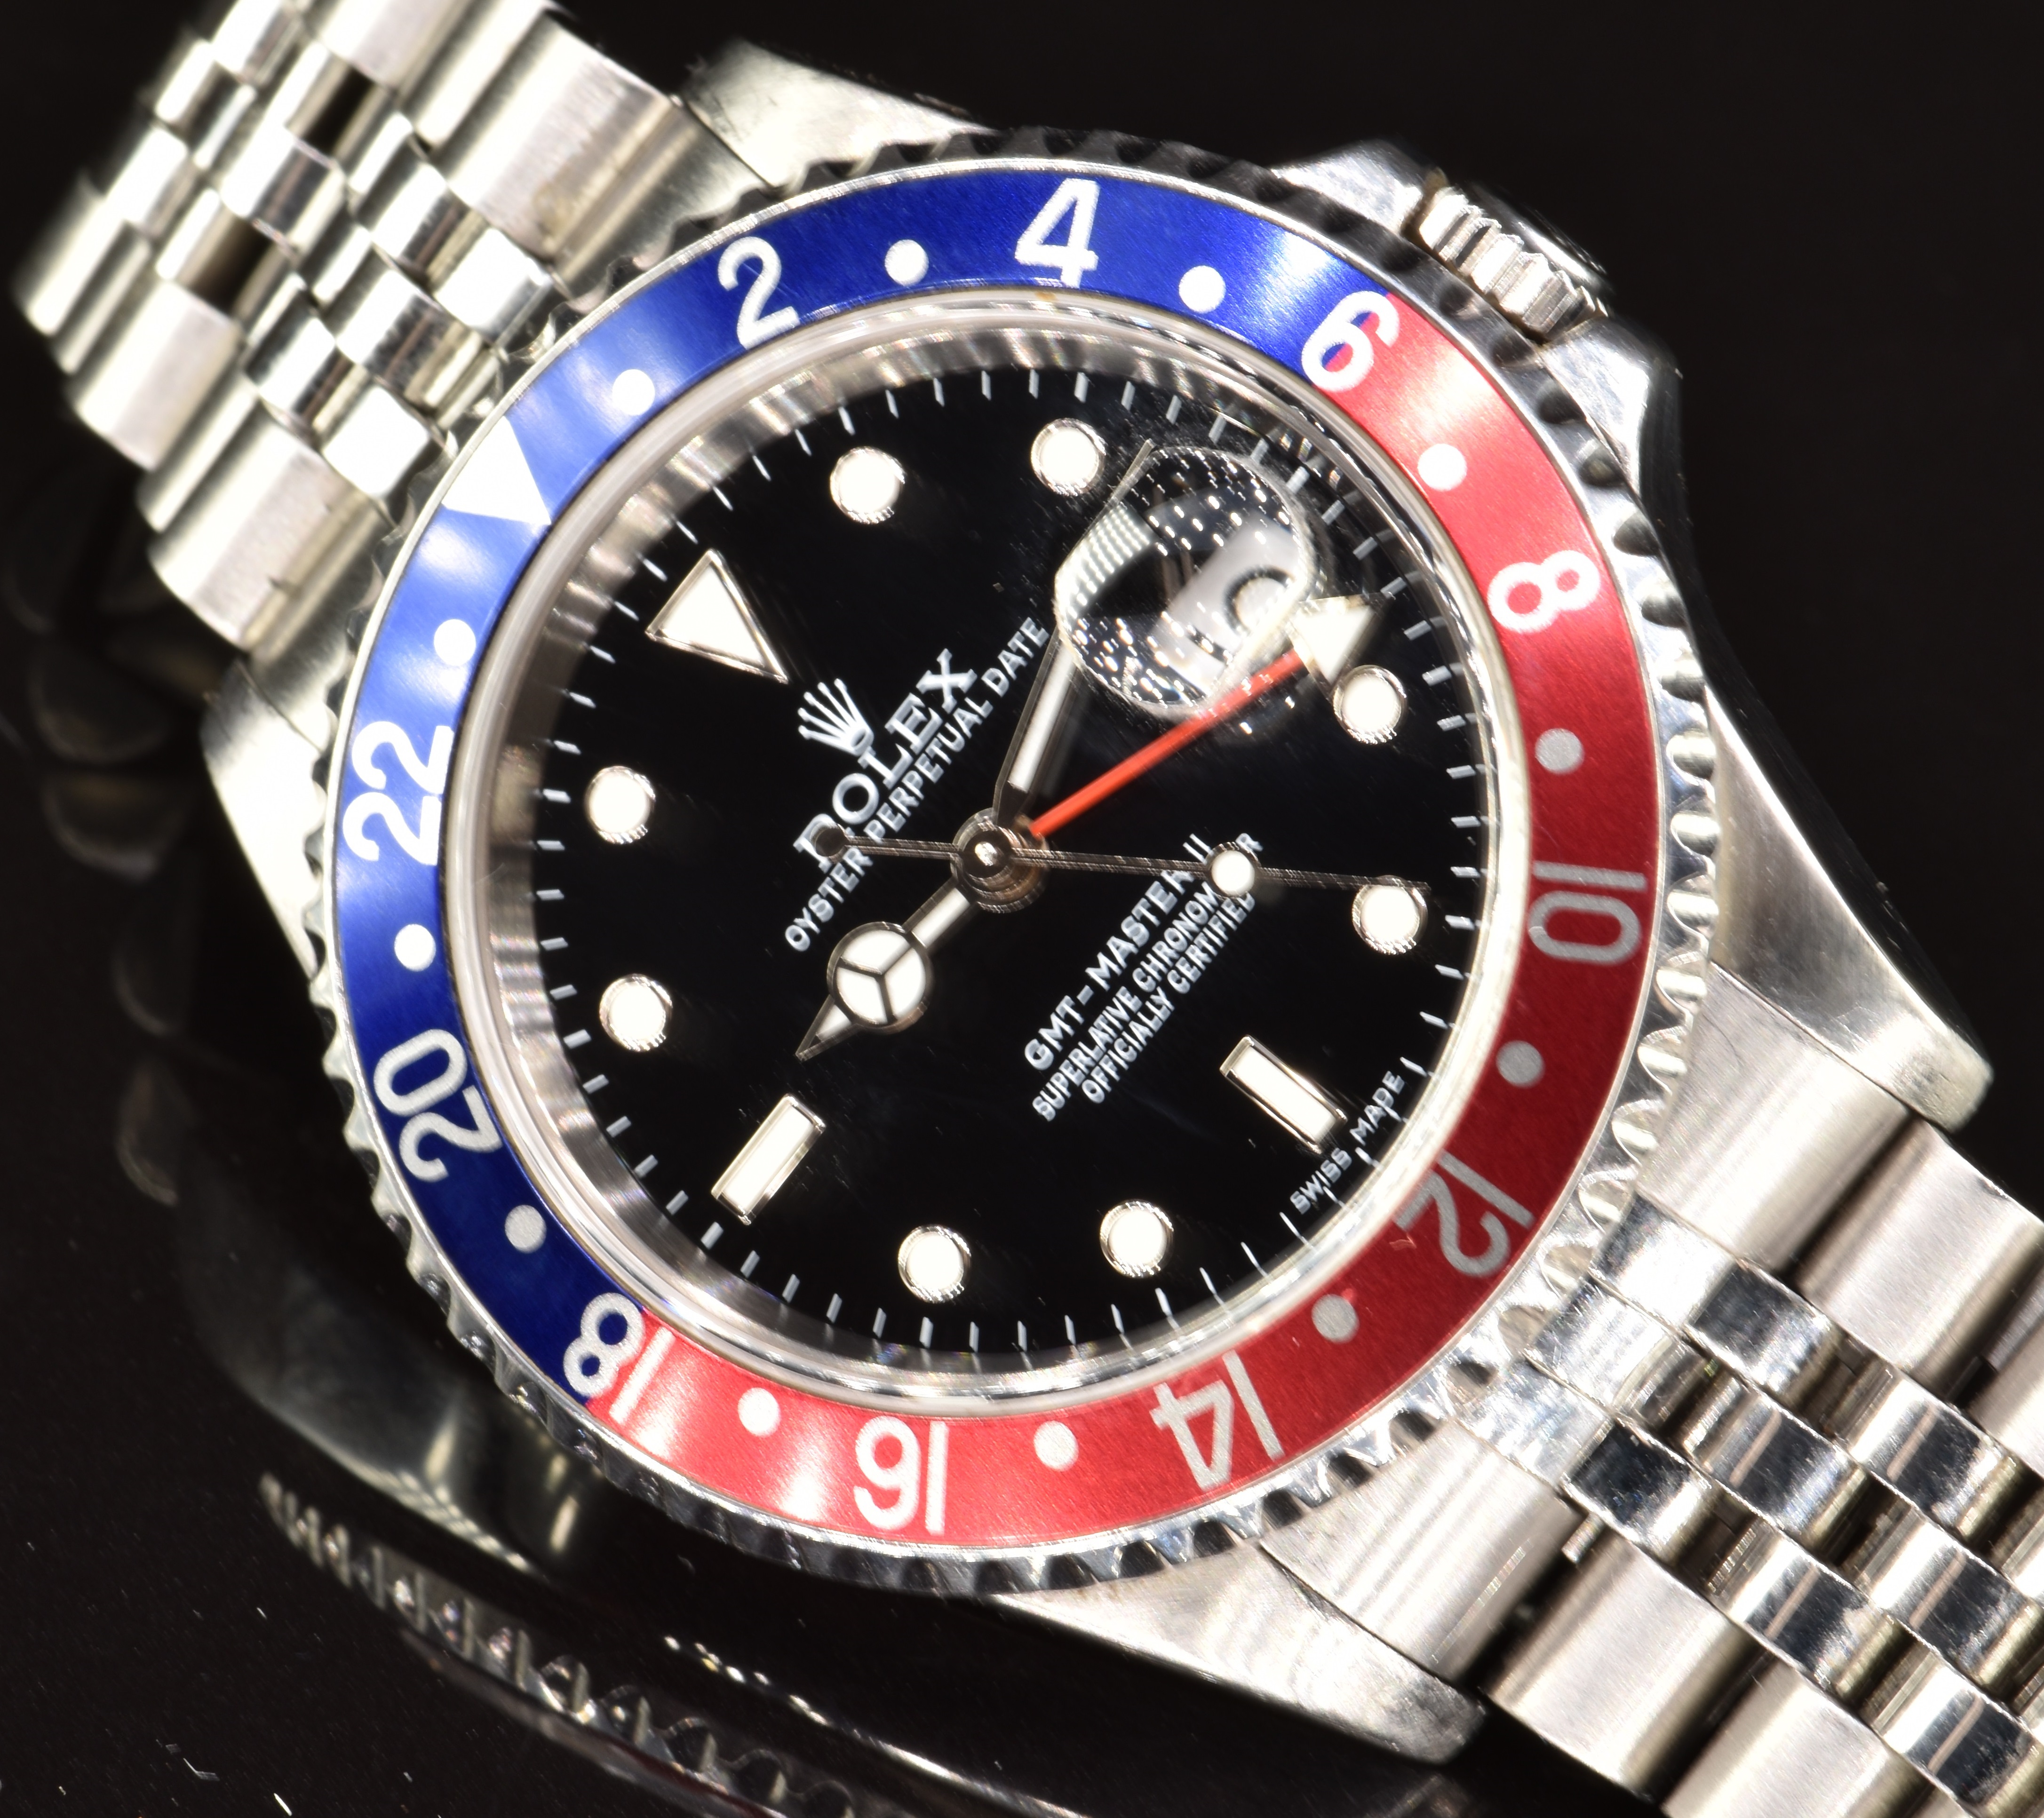 Rolex Oyster Perpetual Date GMT Master II 'Pepsi' gentleman's automatic wristwatch ref. 16710 T, - Image 4 of 8